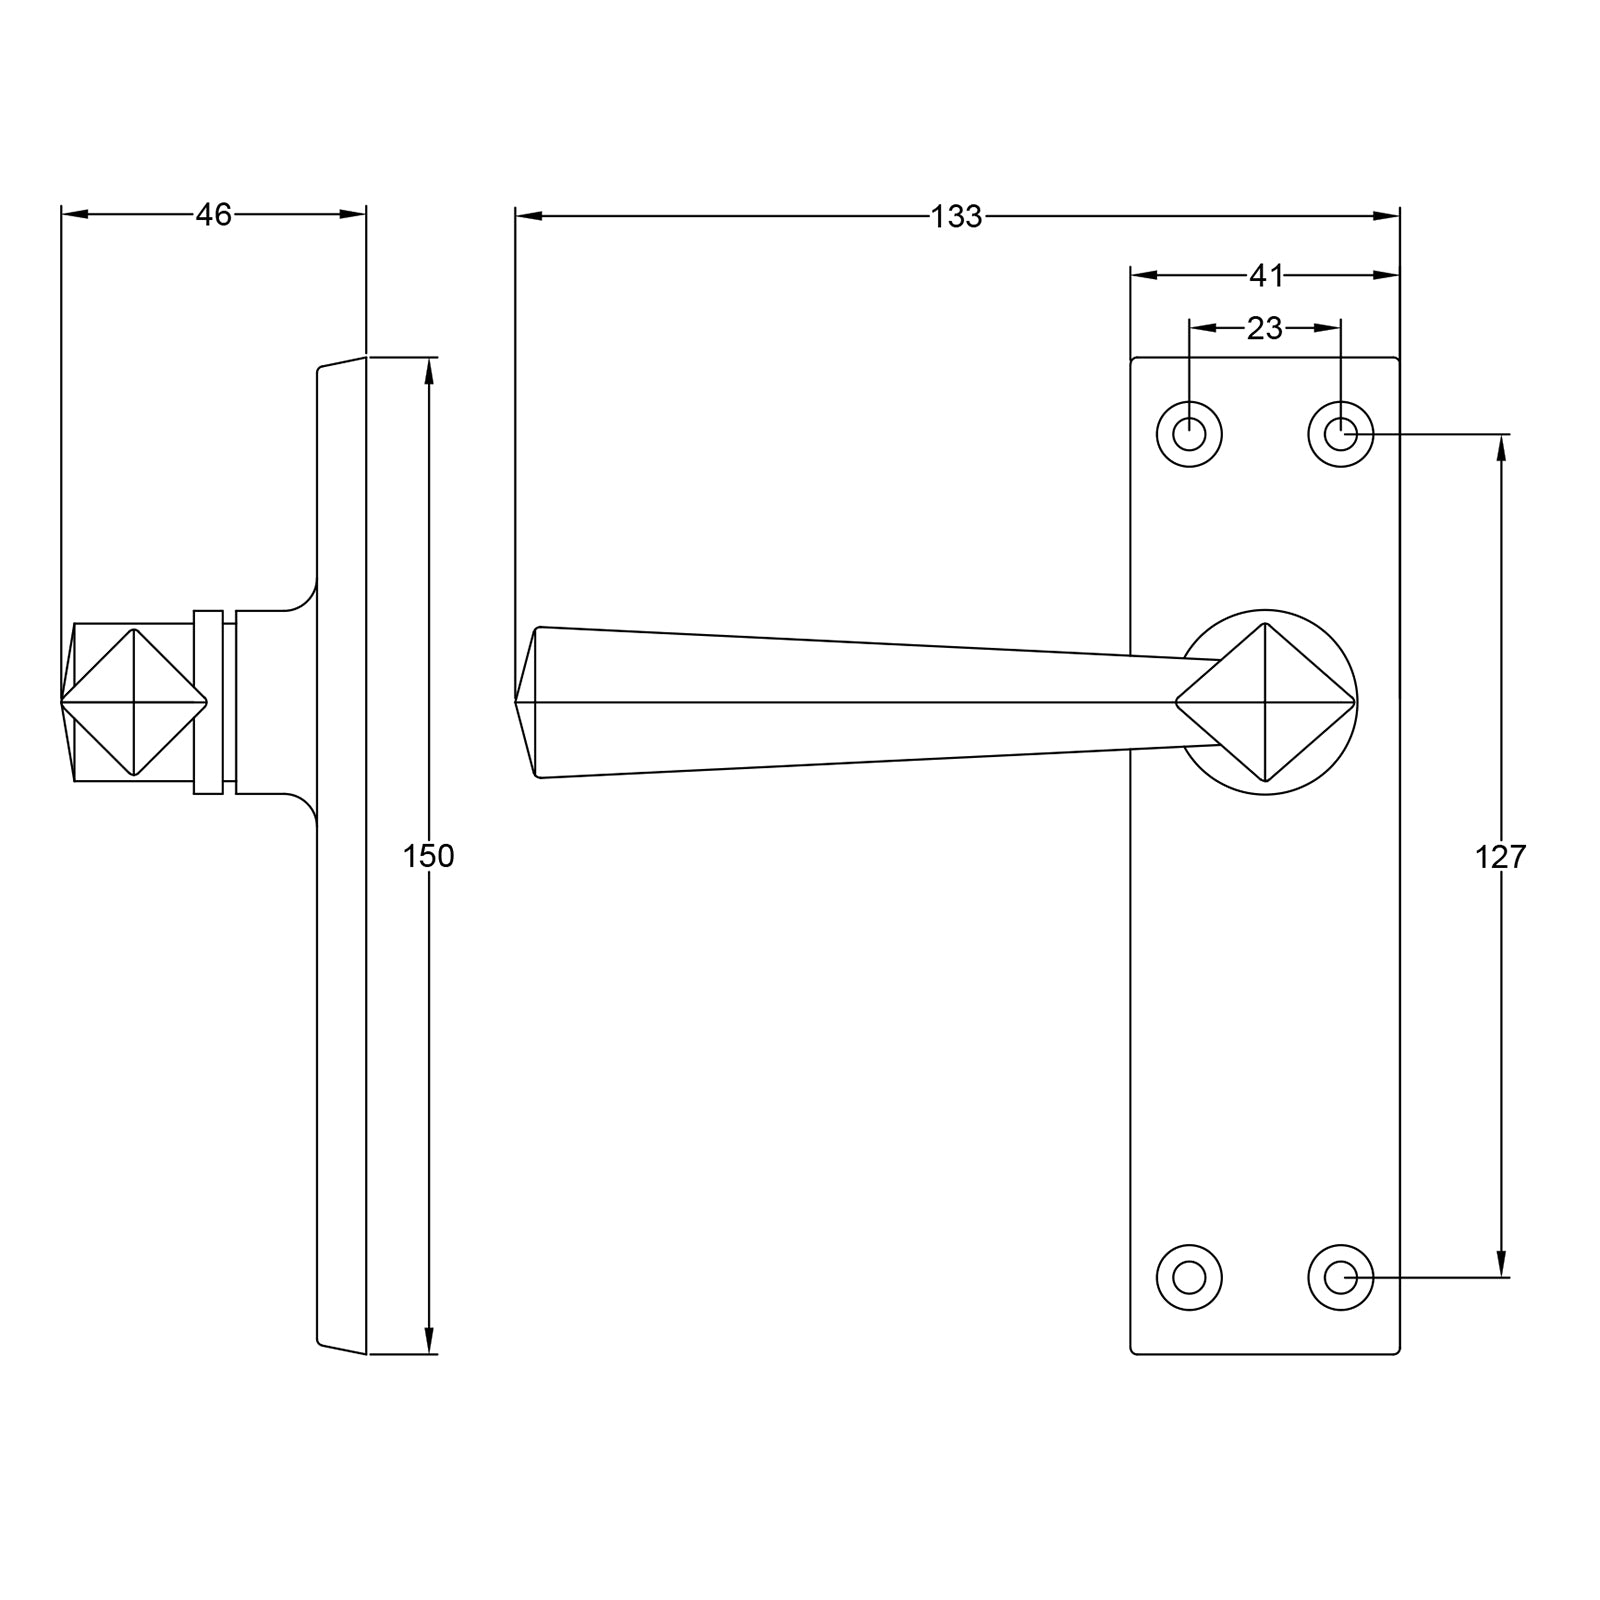 Straight lever door handle dimension drawing SHOW